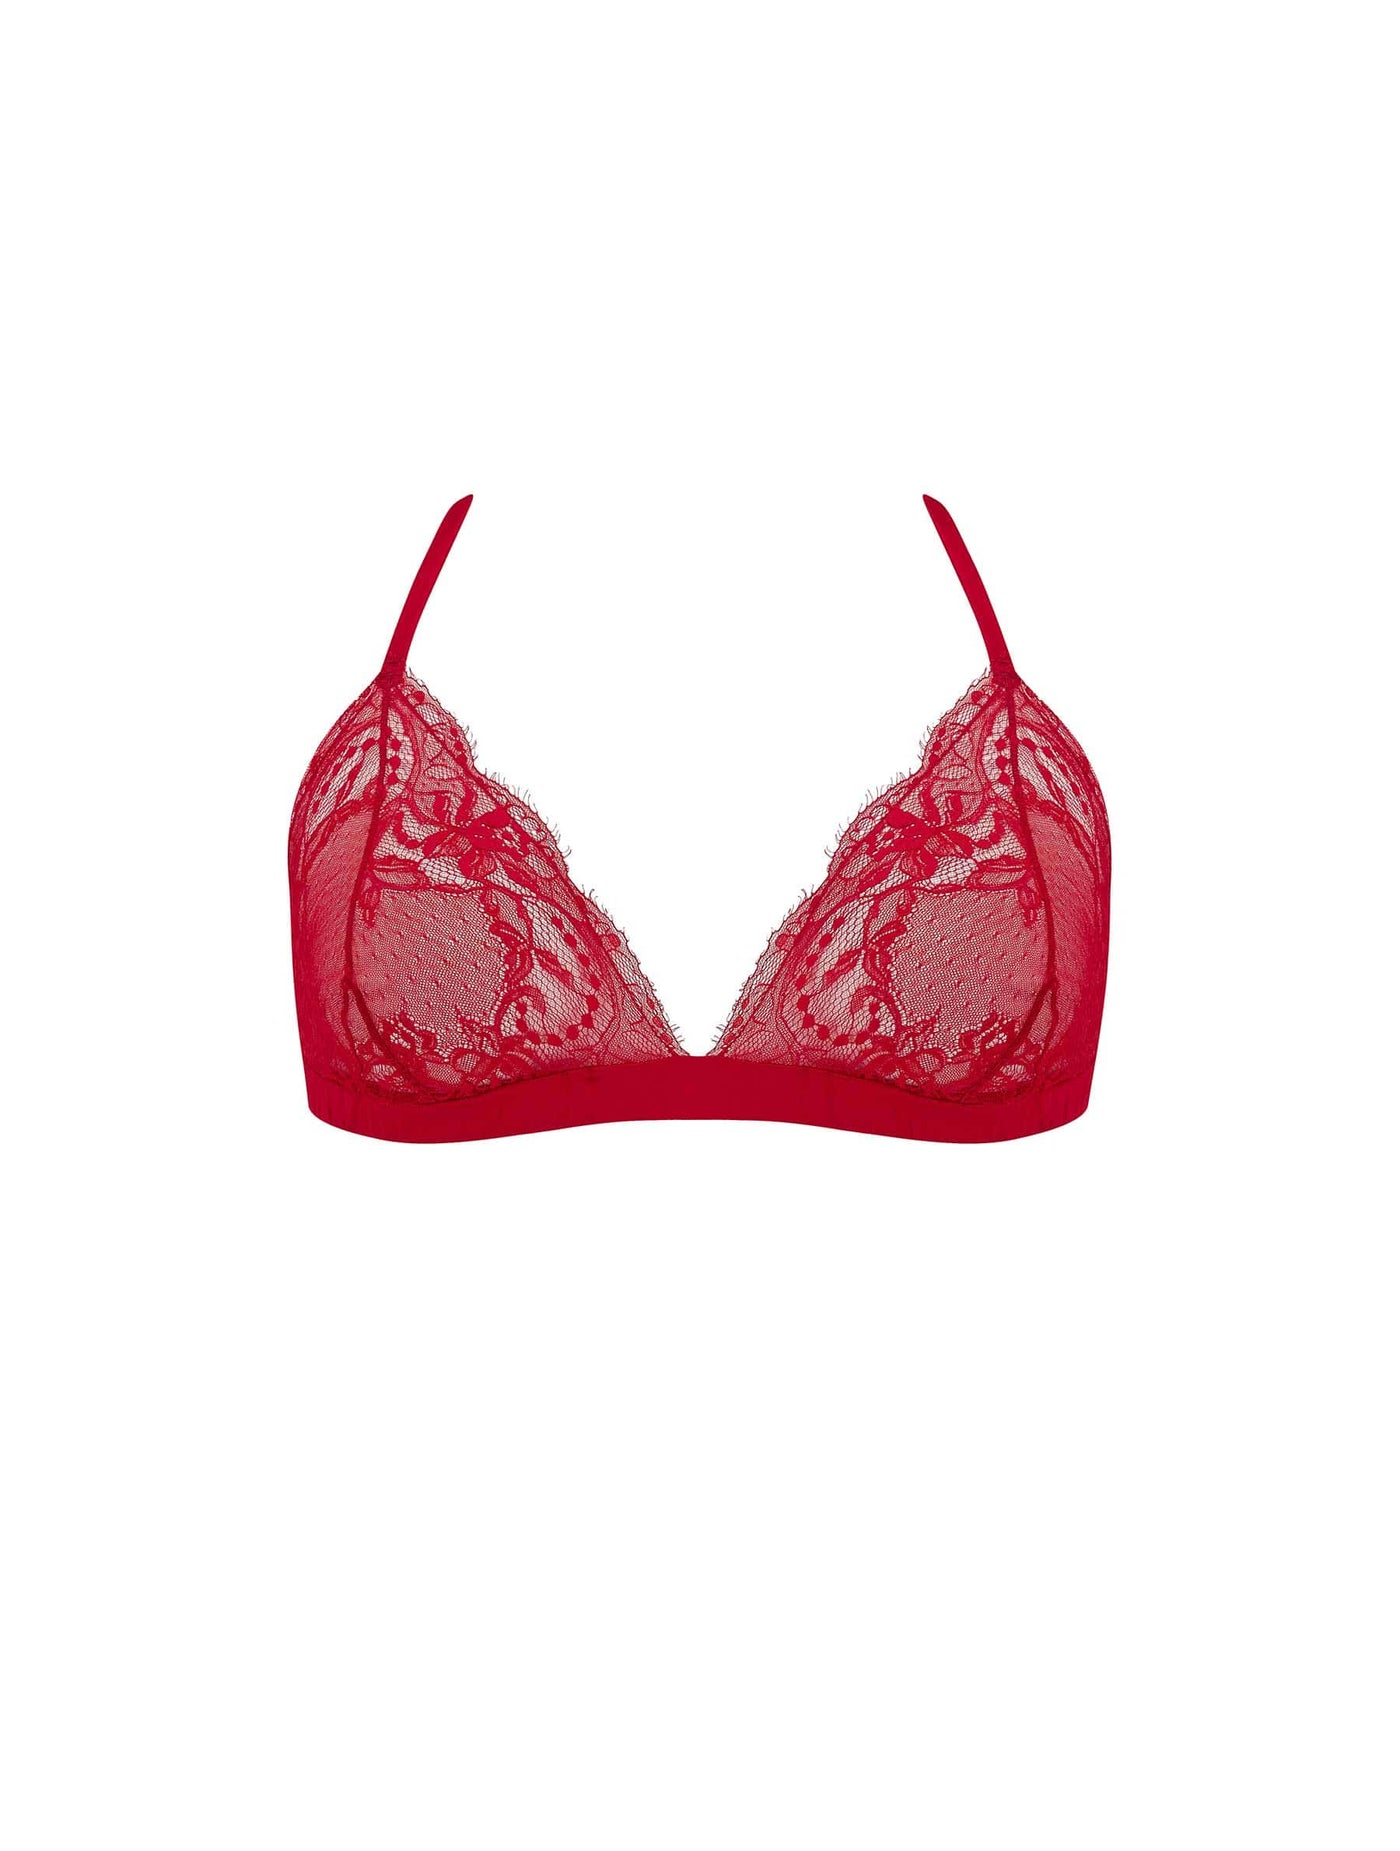 Front of Fleur of England red, lace DD Boudoir Bra from the Adeline collection.